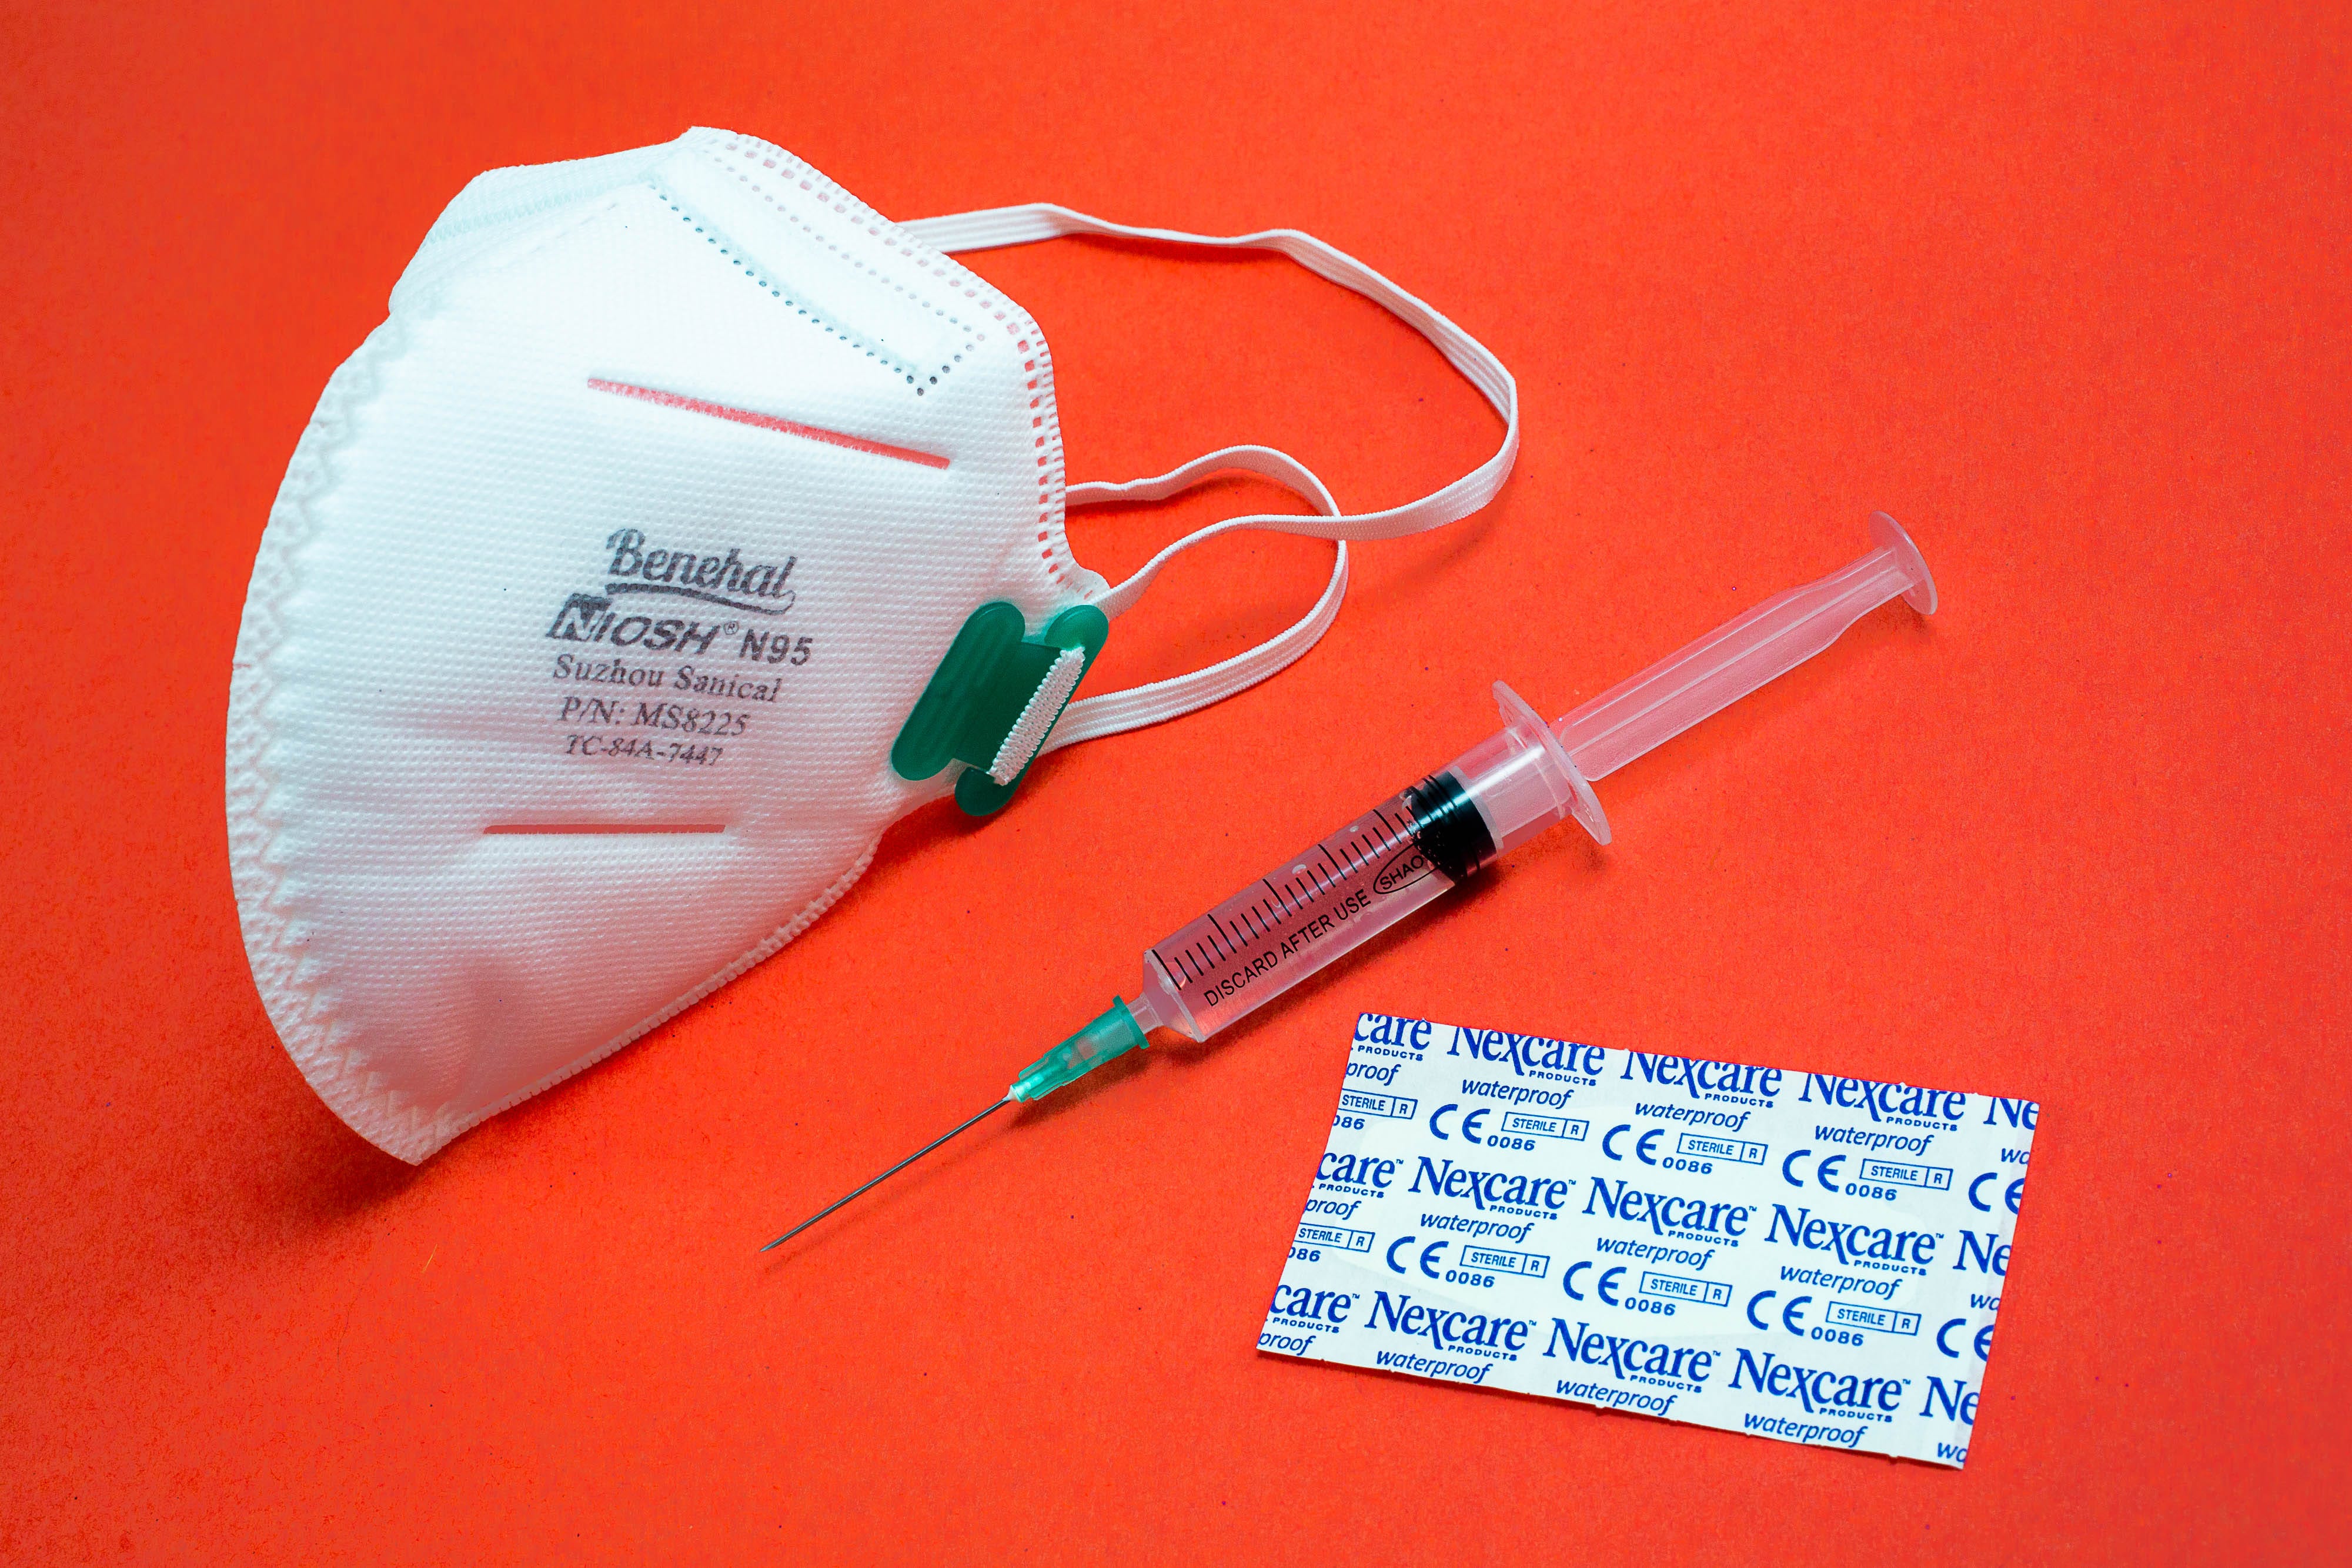 covid-19-masks-booster-shots-vaccines-syringes-patches-winter-2021-cnet-057